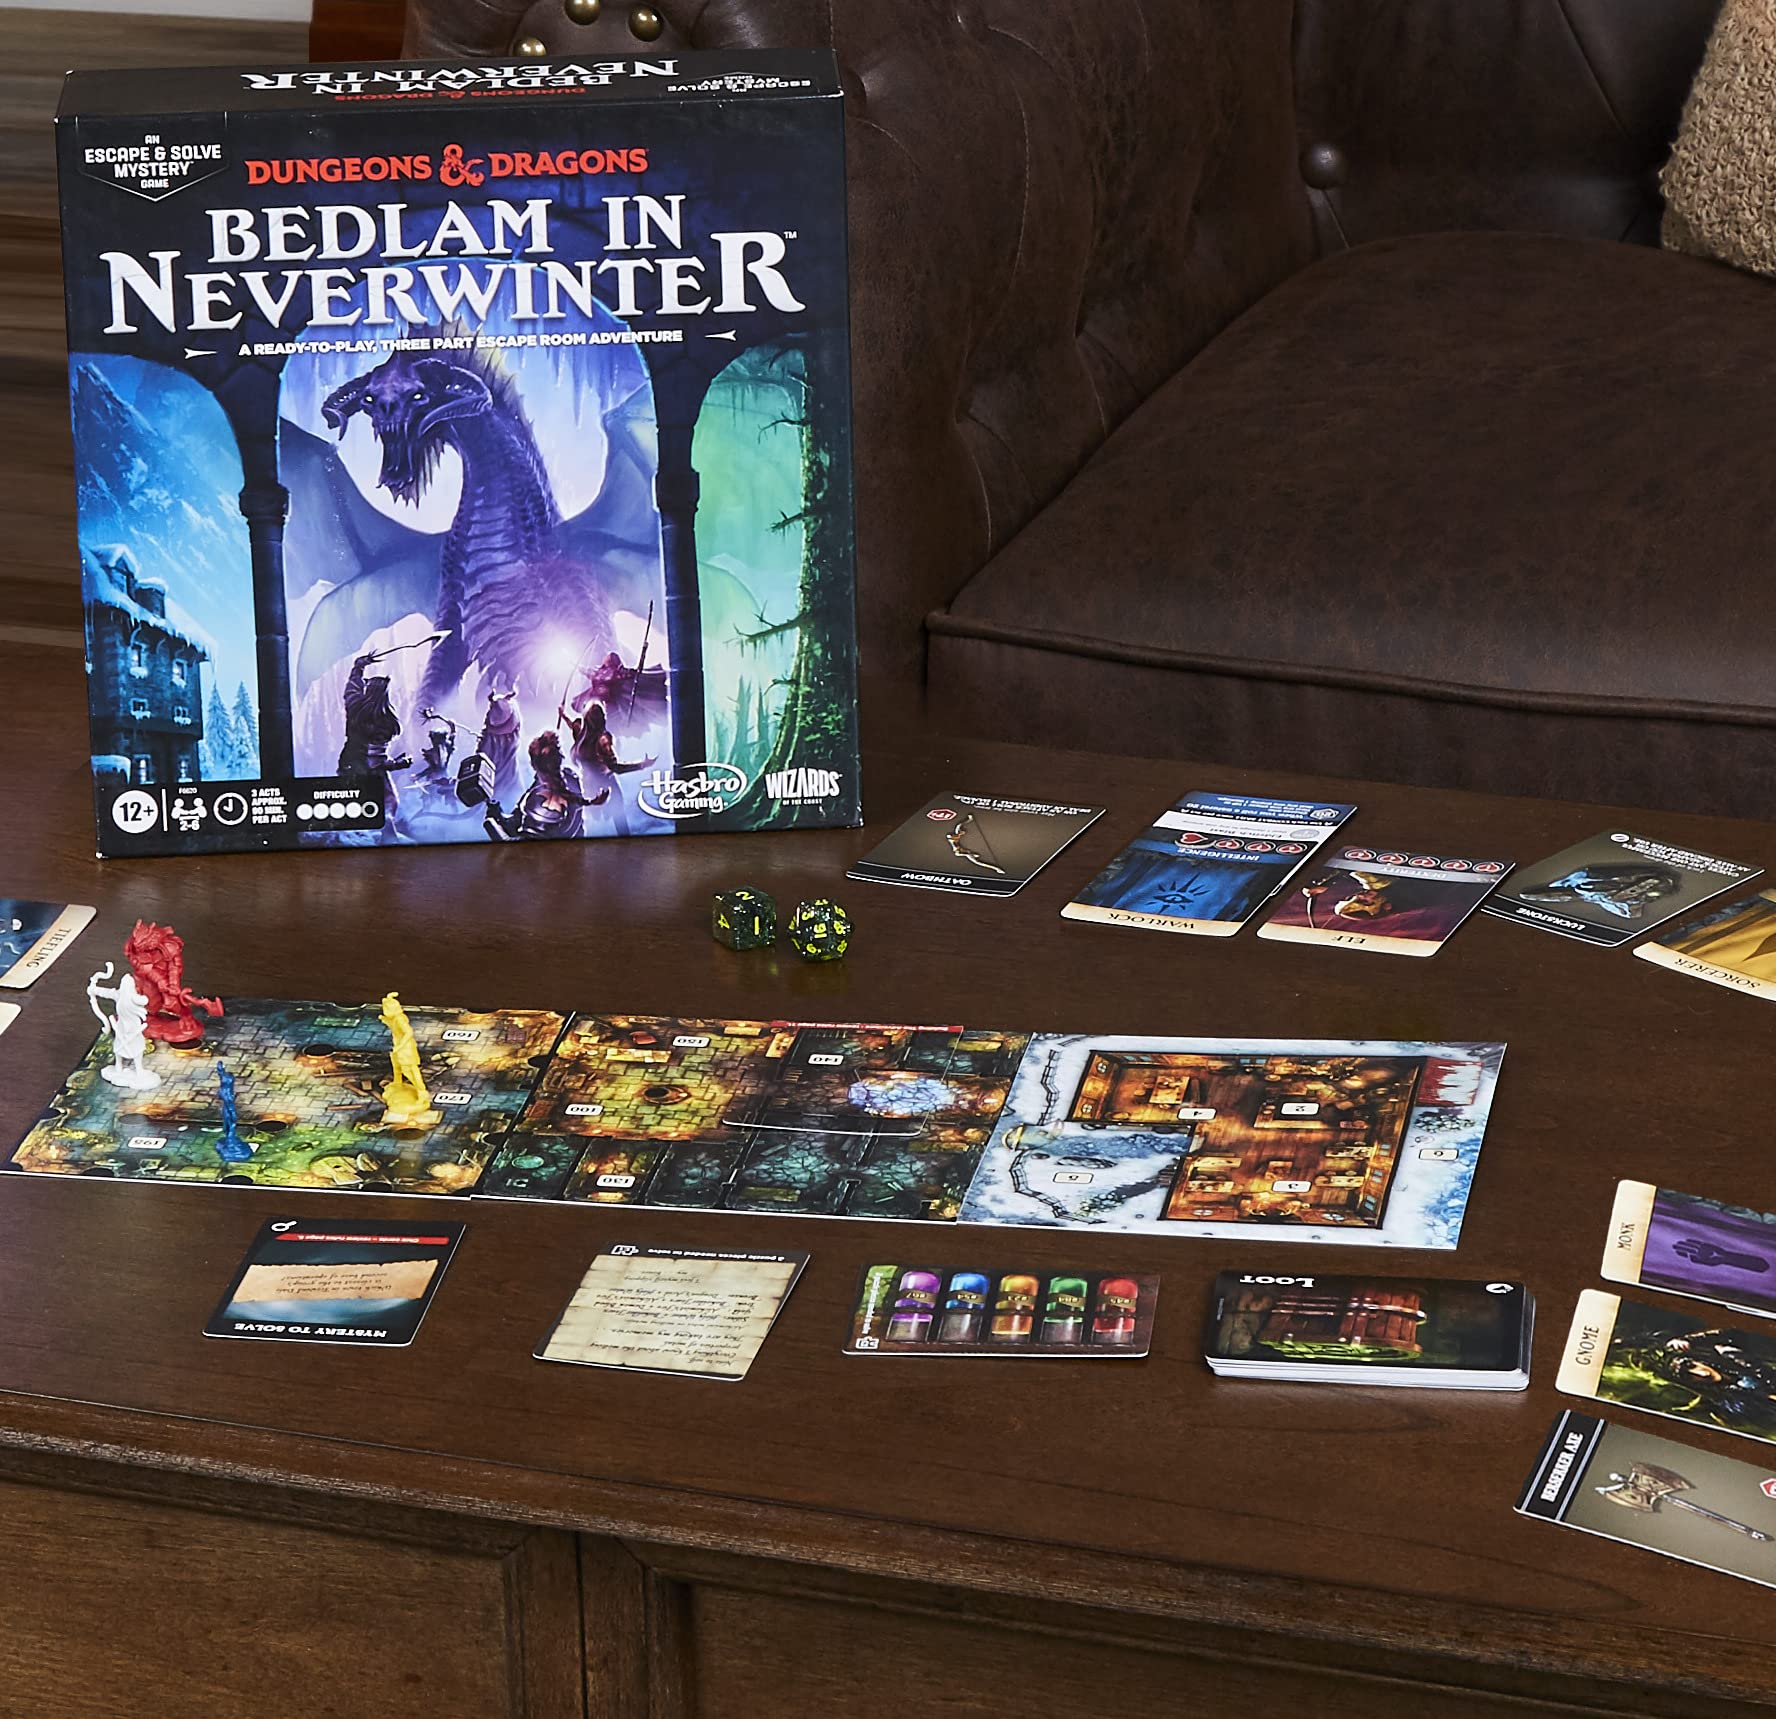 Dungeons & Dragons: Bedlam in Neverwinter, Escape Room, Cooperative Board Games for Ages 12+, 2-6 Players, 3 Acts Approx. 90 Mins. Each